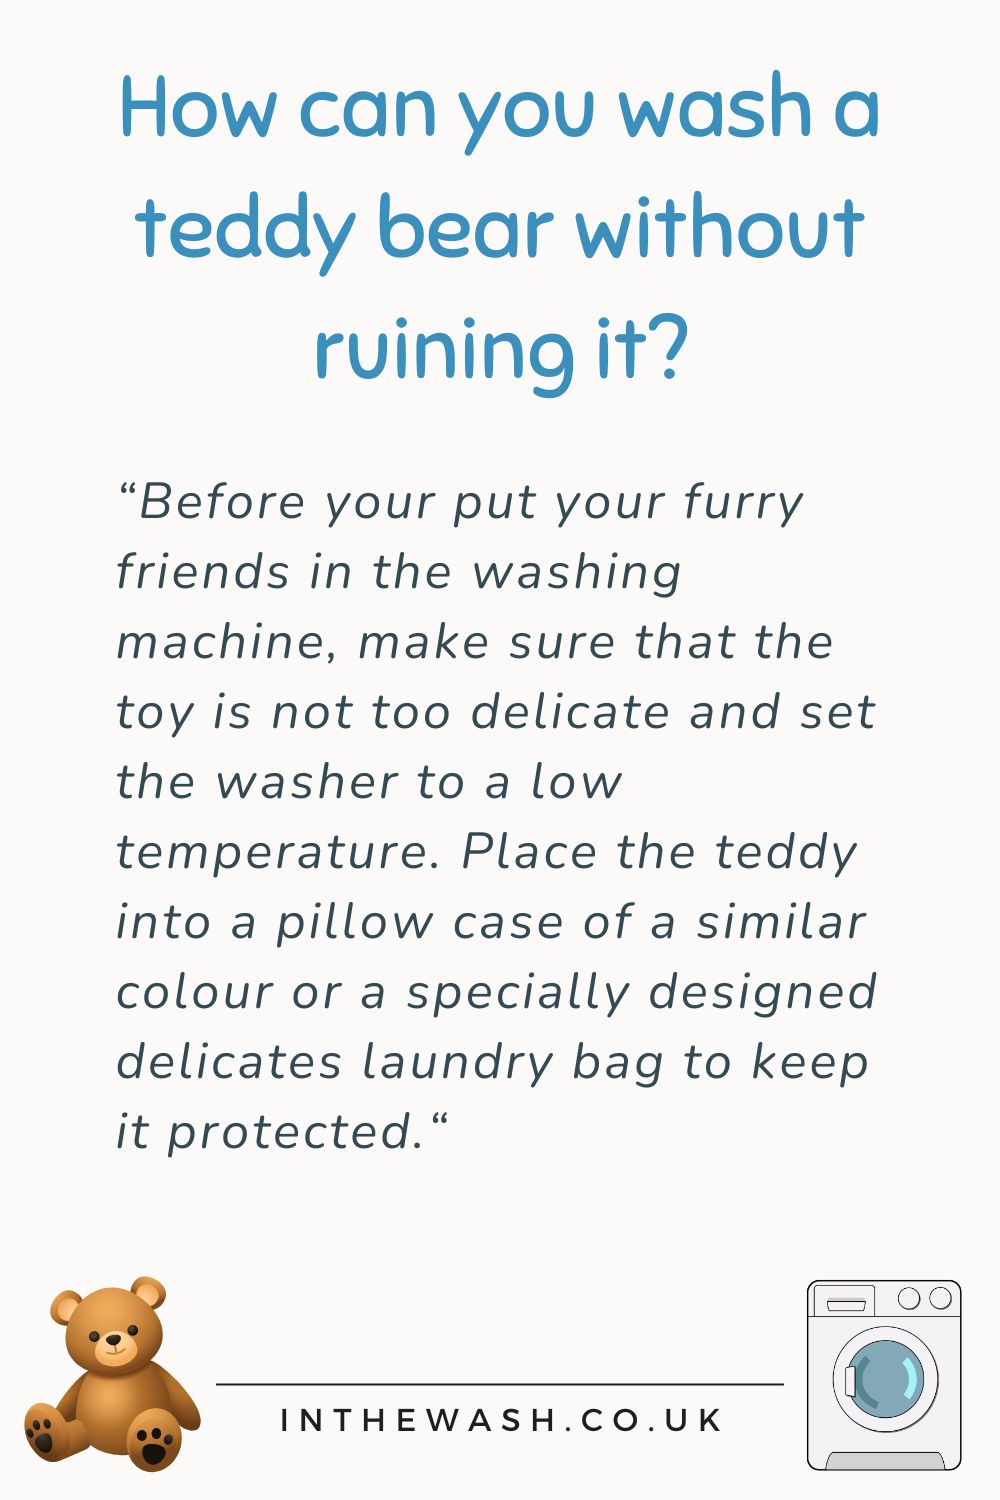 How to Wash a Teddy Bear Without Ruining It